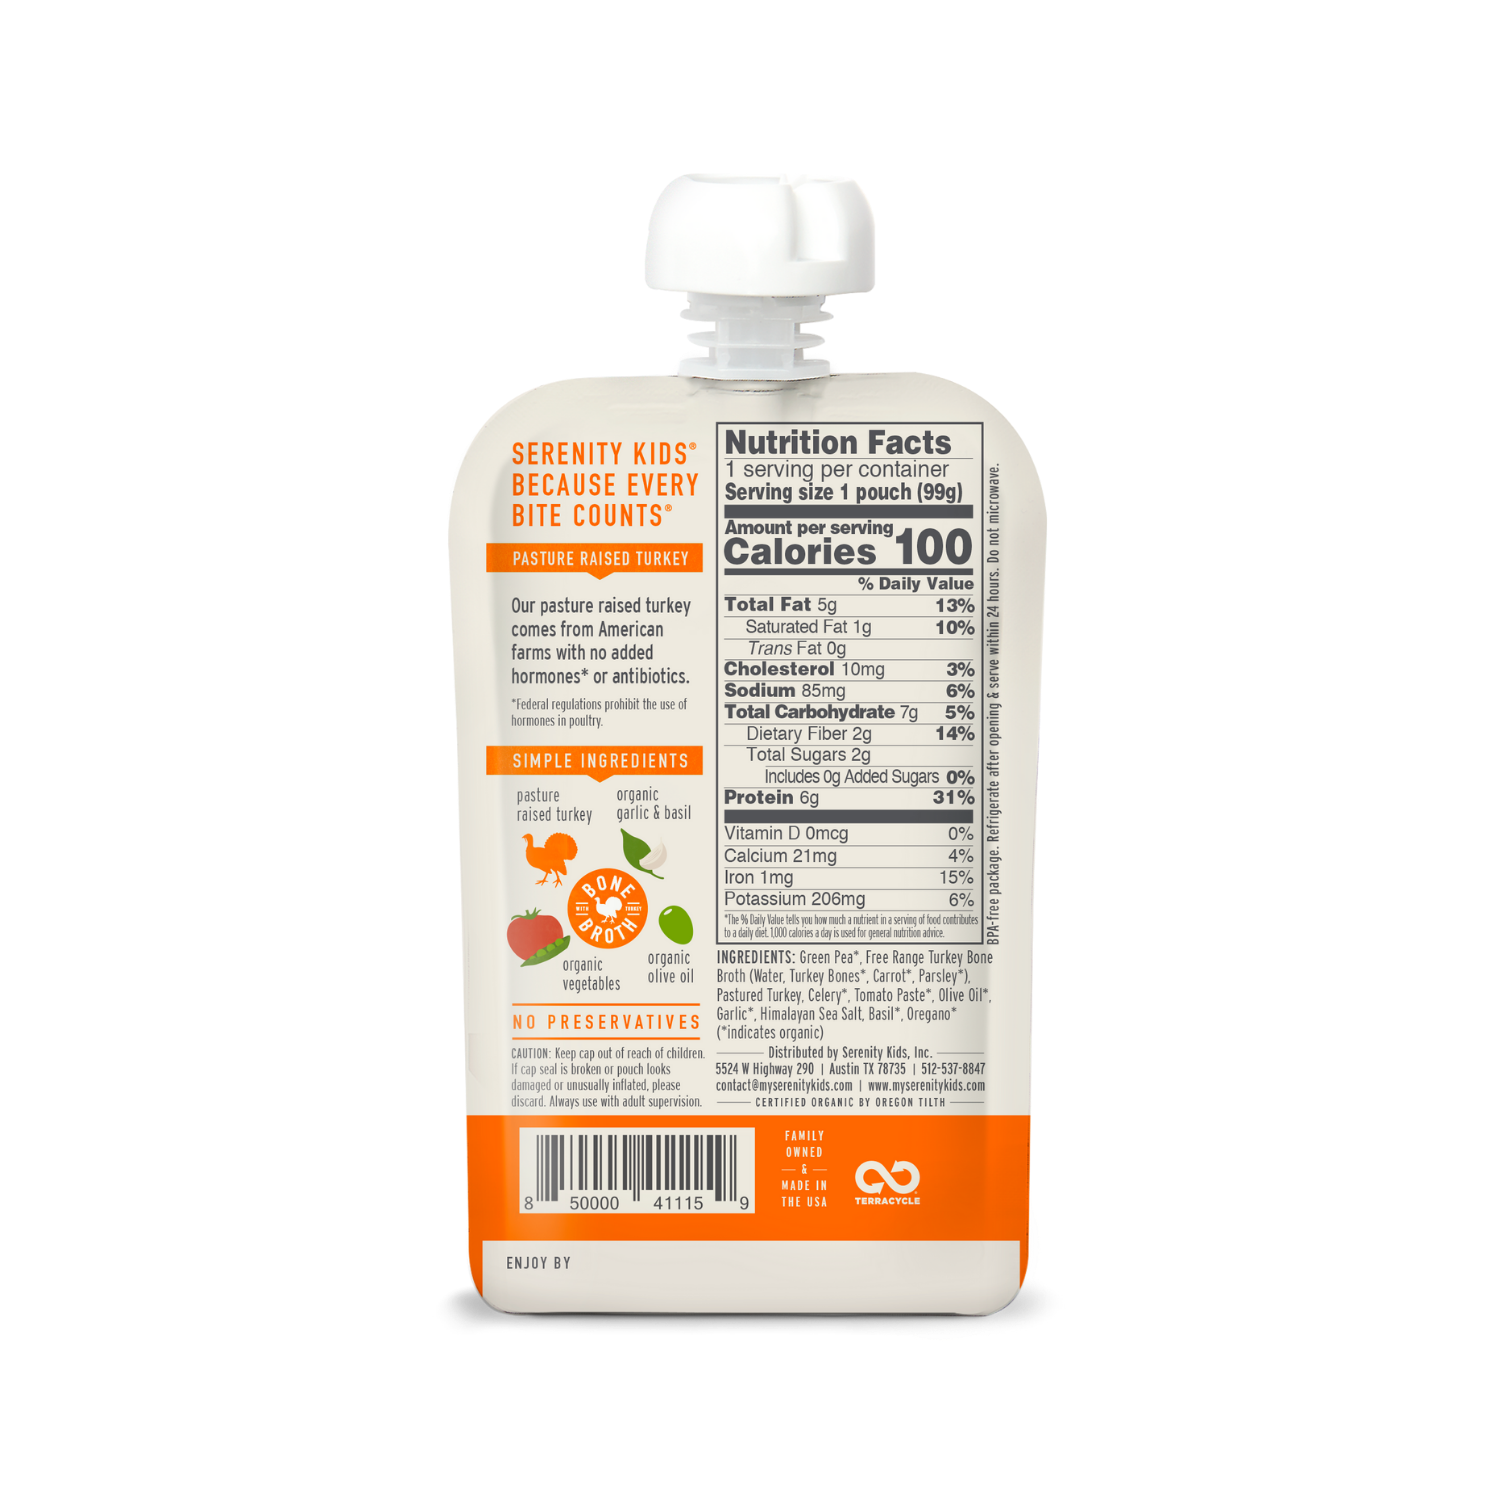 Turkey Bolognese Baby Food Pouch with Bone Broth